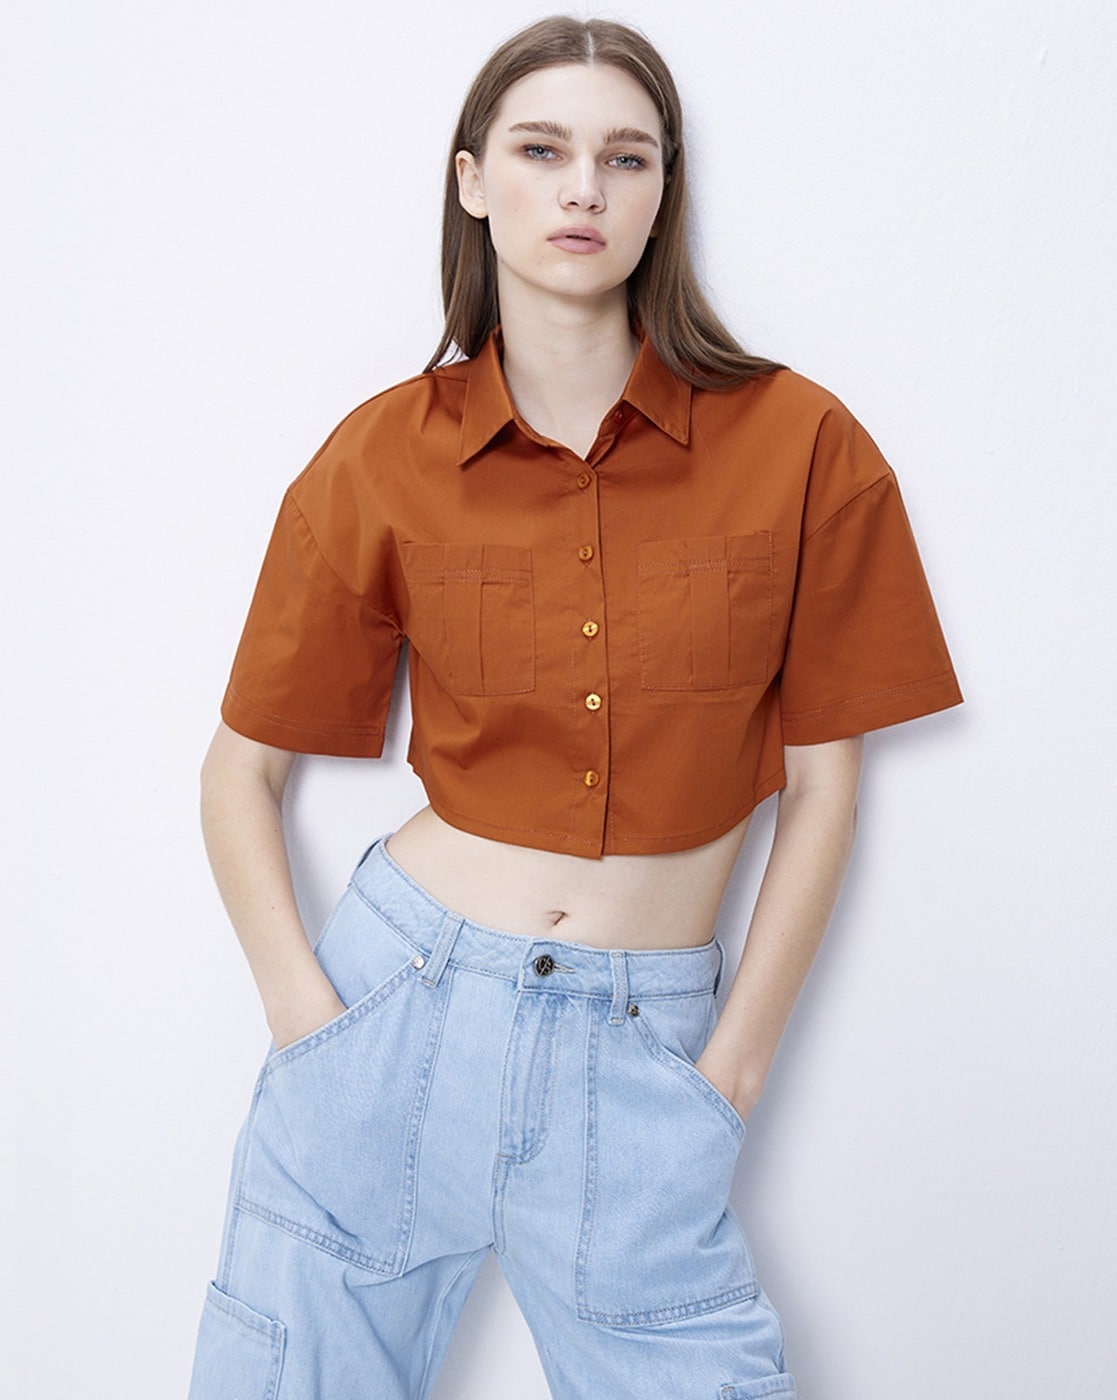 Crop Tops Are Officially Over (Hurrah!), but Prepare Your Closet